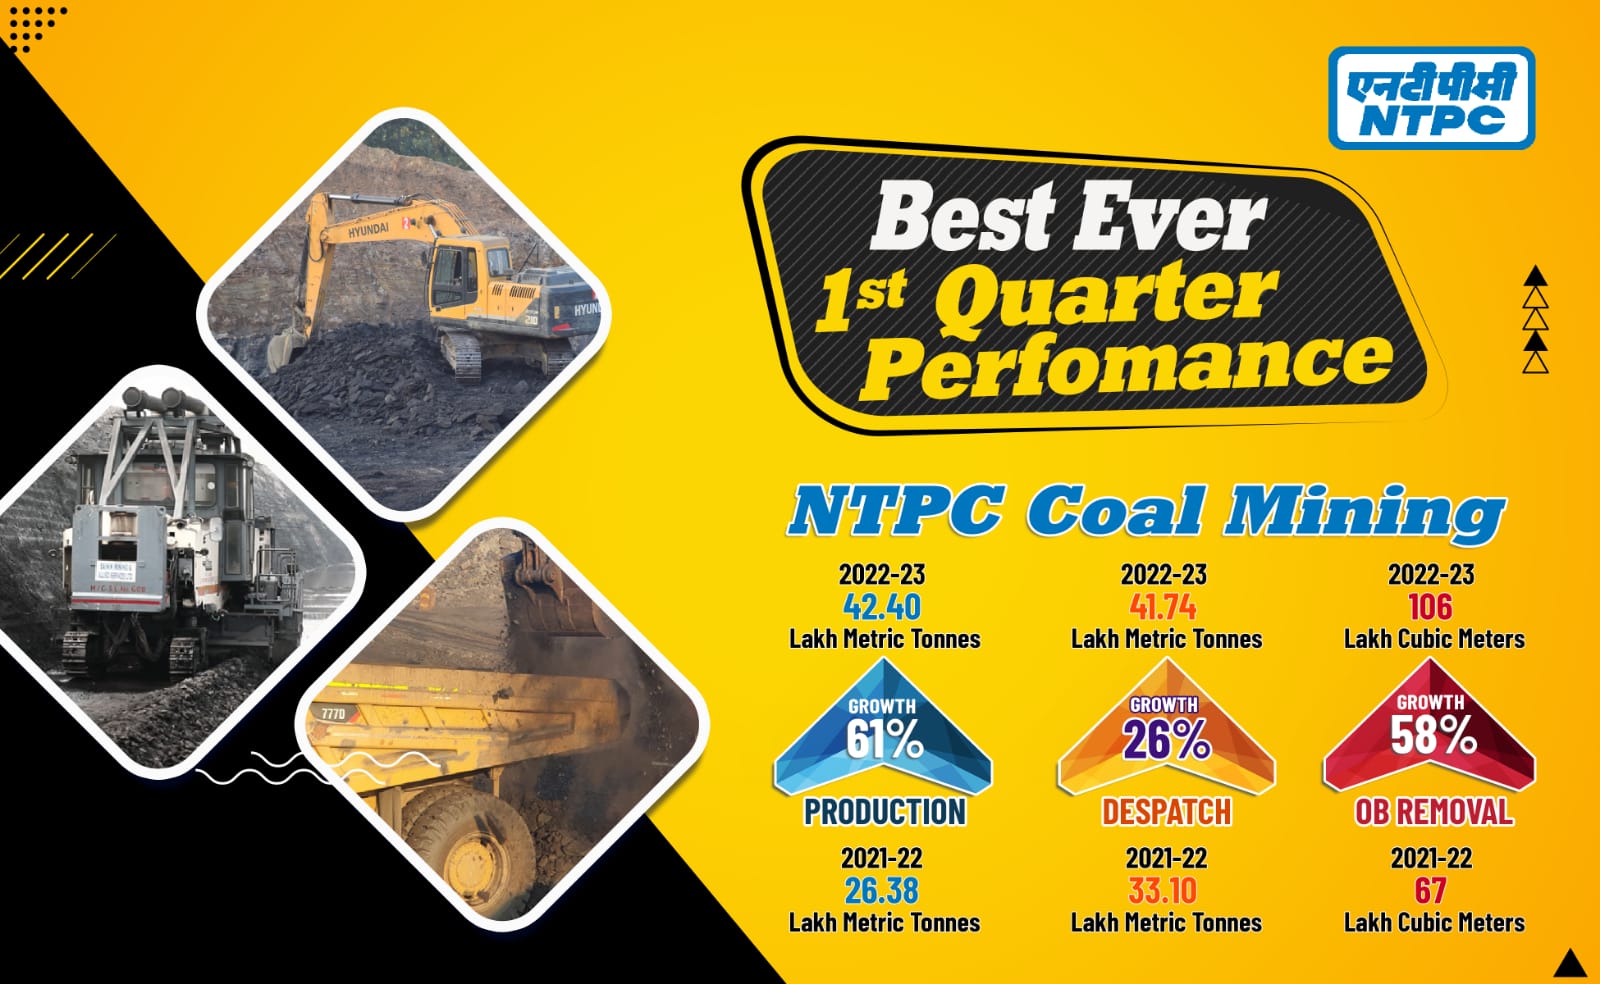 ntpc-coal-mining-achieves-42-40-lac-metric-tonnes-of-coal-production-in-first-quarter-fy23